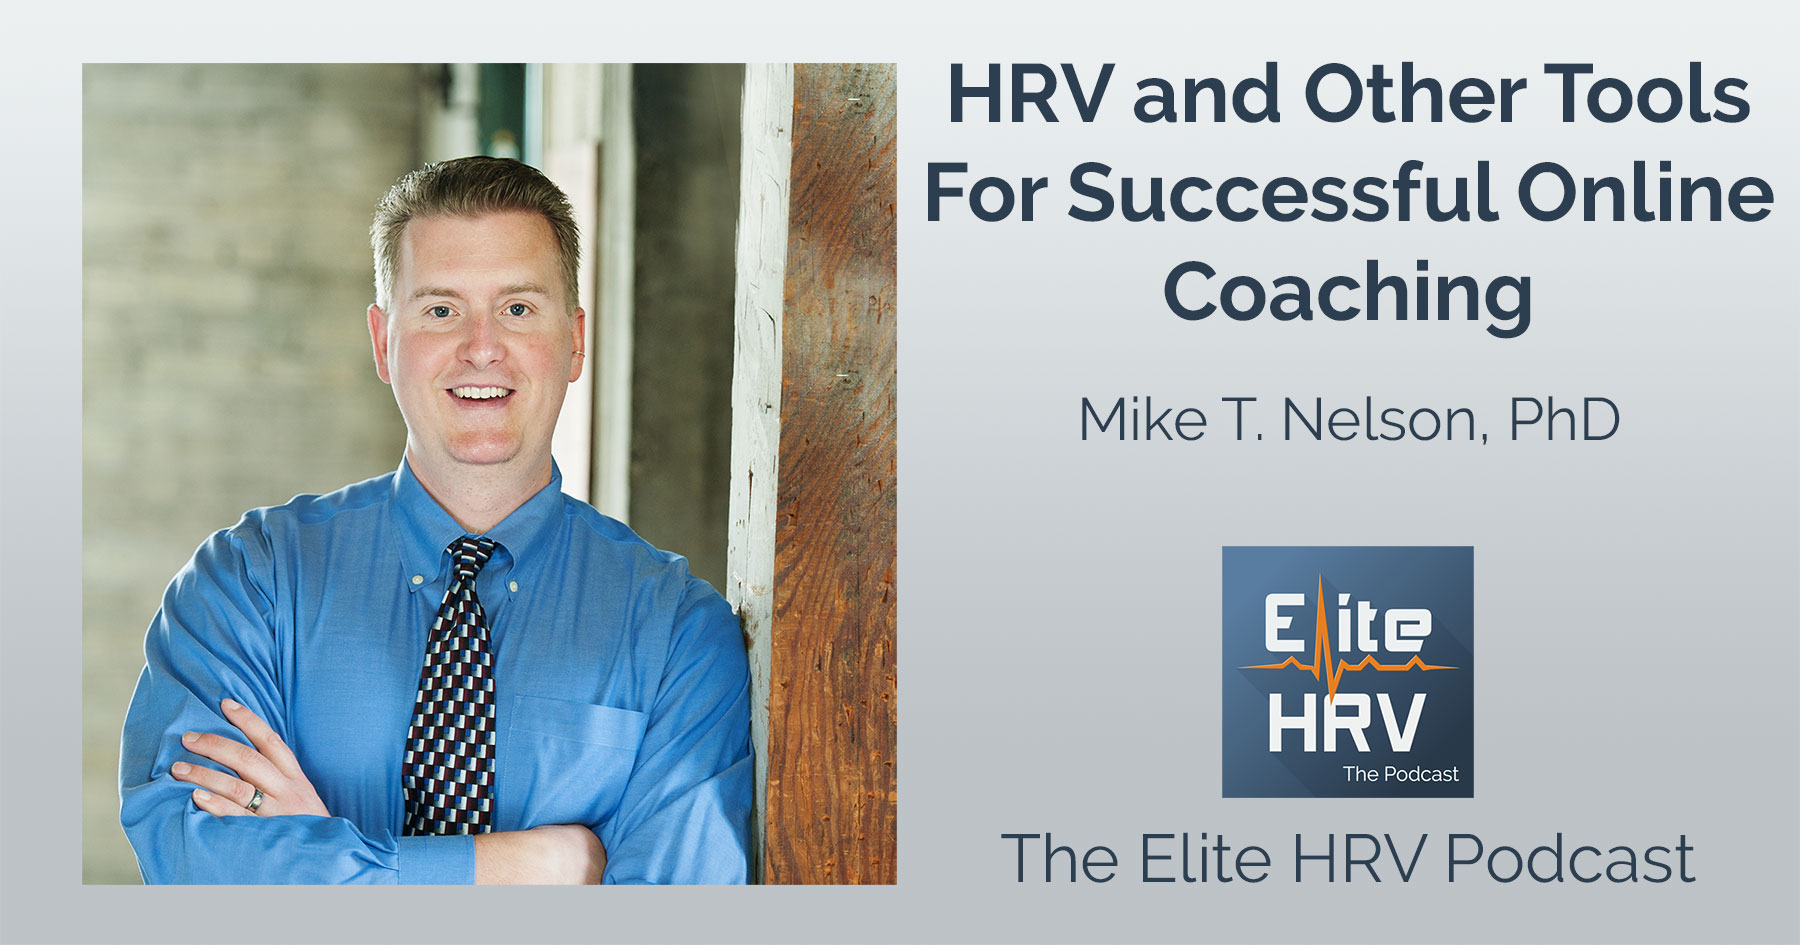 HRV for Successful Online Coaching with Dr. Mike T. Nelson